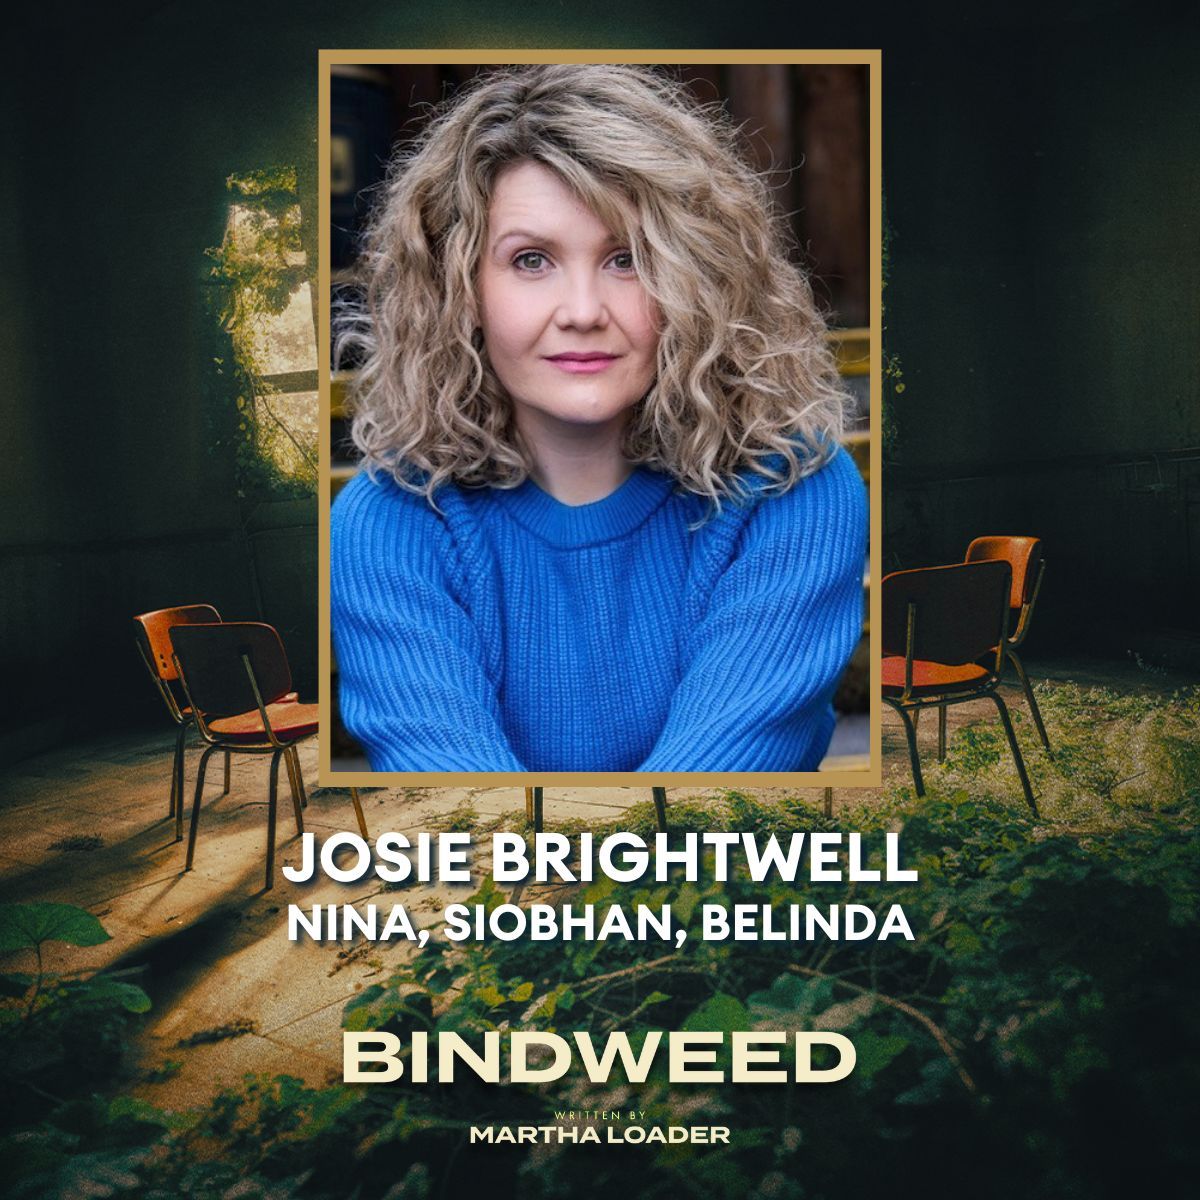 First up in our Bindweed cast is Josie Brightwell (@JosieBrightwell), who will be playing Nina, Siobhan and Belinda. Josie is an east-based actor from Rayleigh, with previous credits including Call The Midwife (BBC) and Mum's The Word (UK Tour). Book now: buff.ly/3X1z8DM